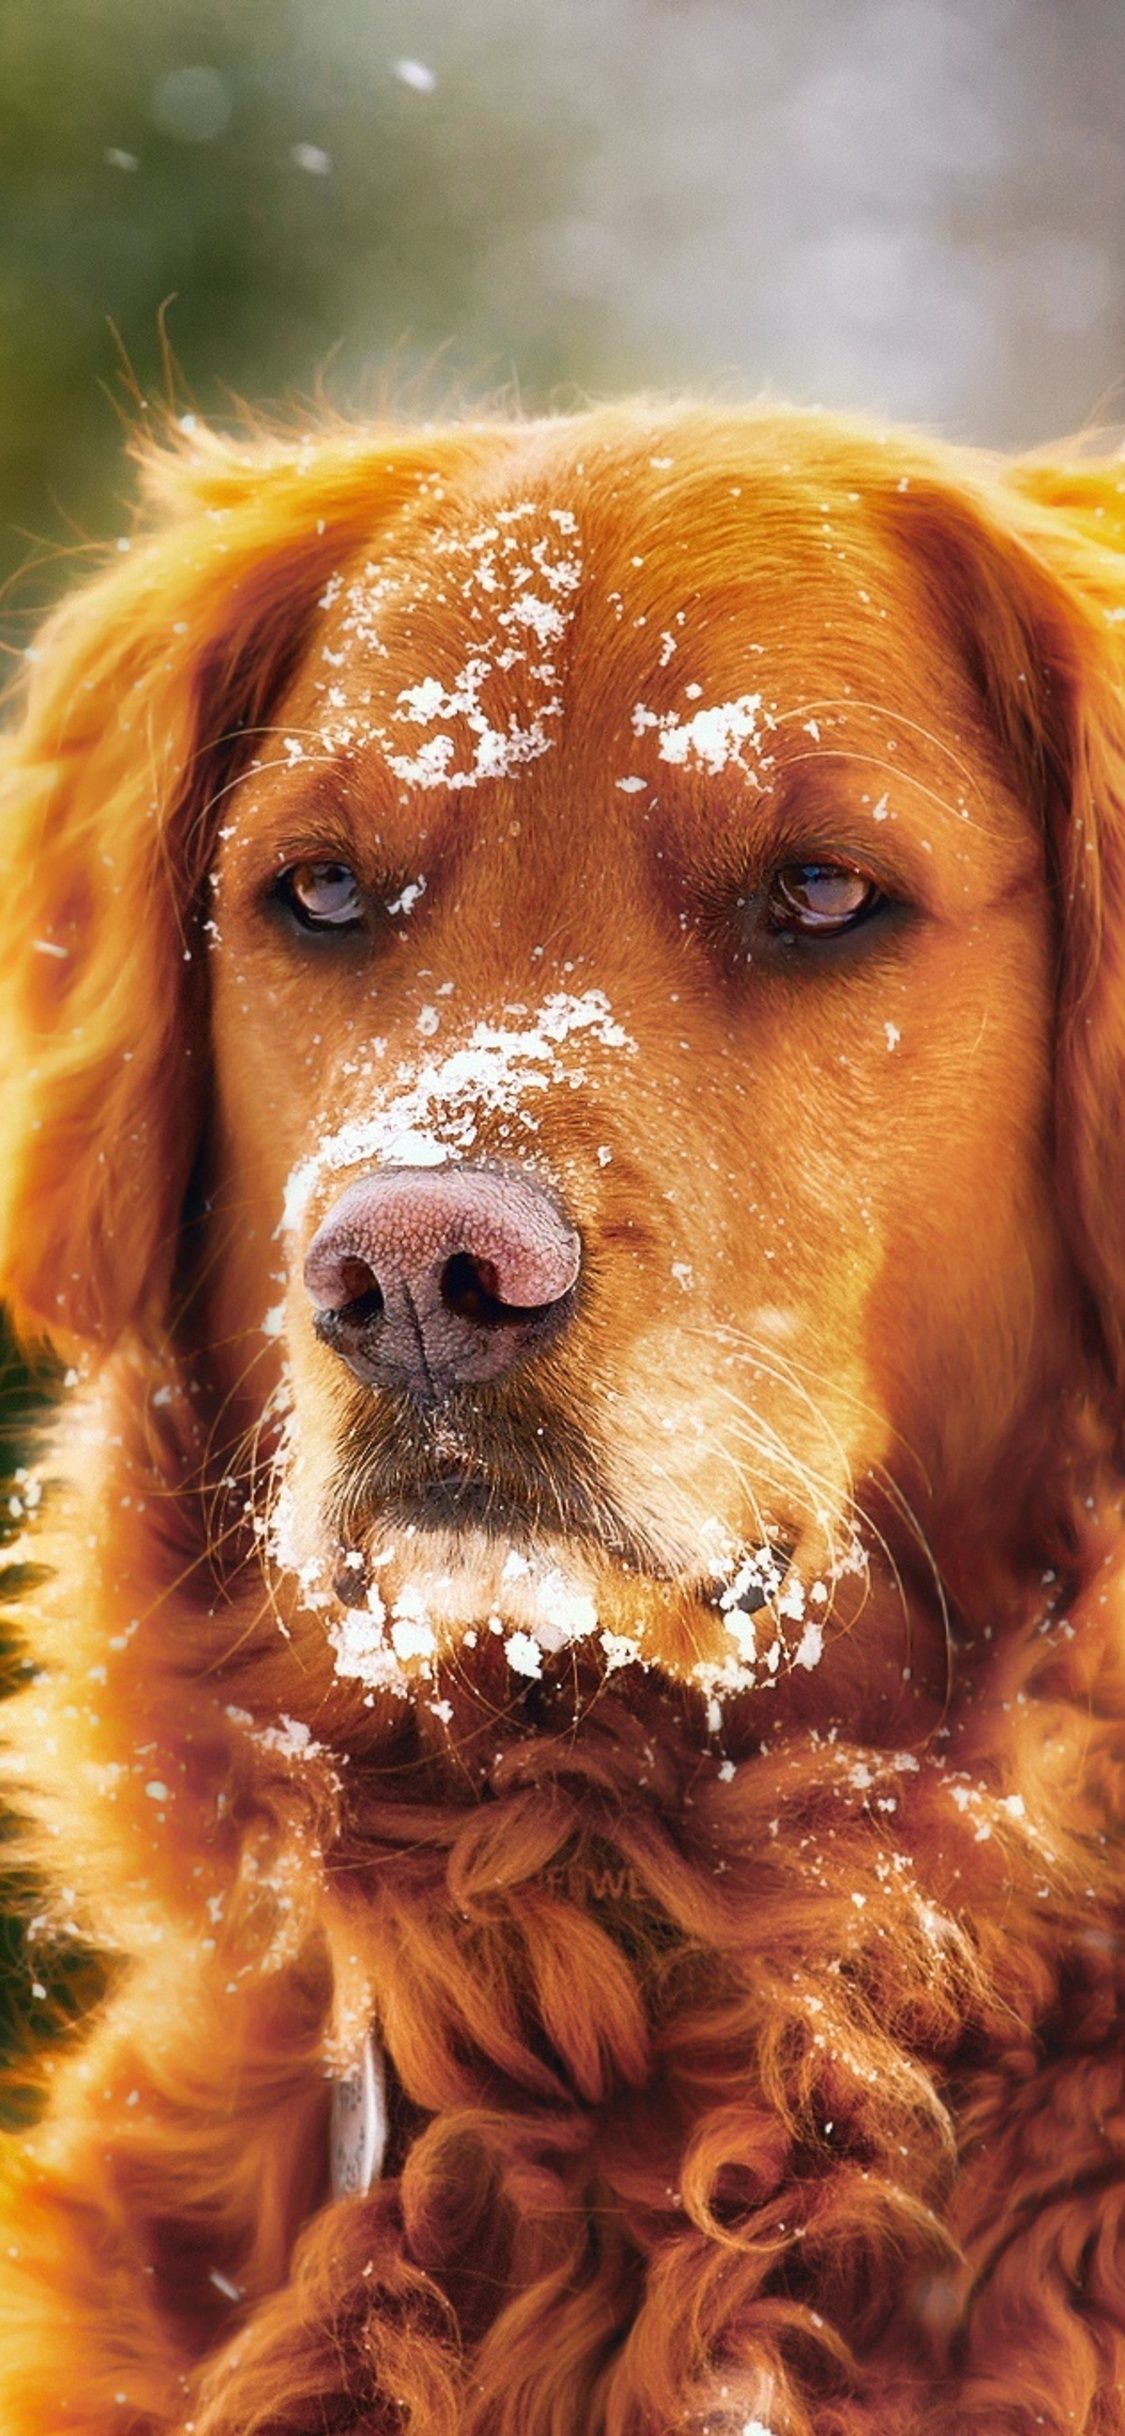 Dog In Winter With Snow Over Face iPhone XS, iPhone iPhone X HD 4k Wallpaper, Image, Background, Photo and Picture